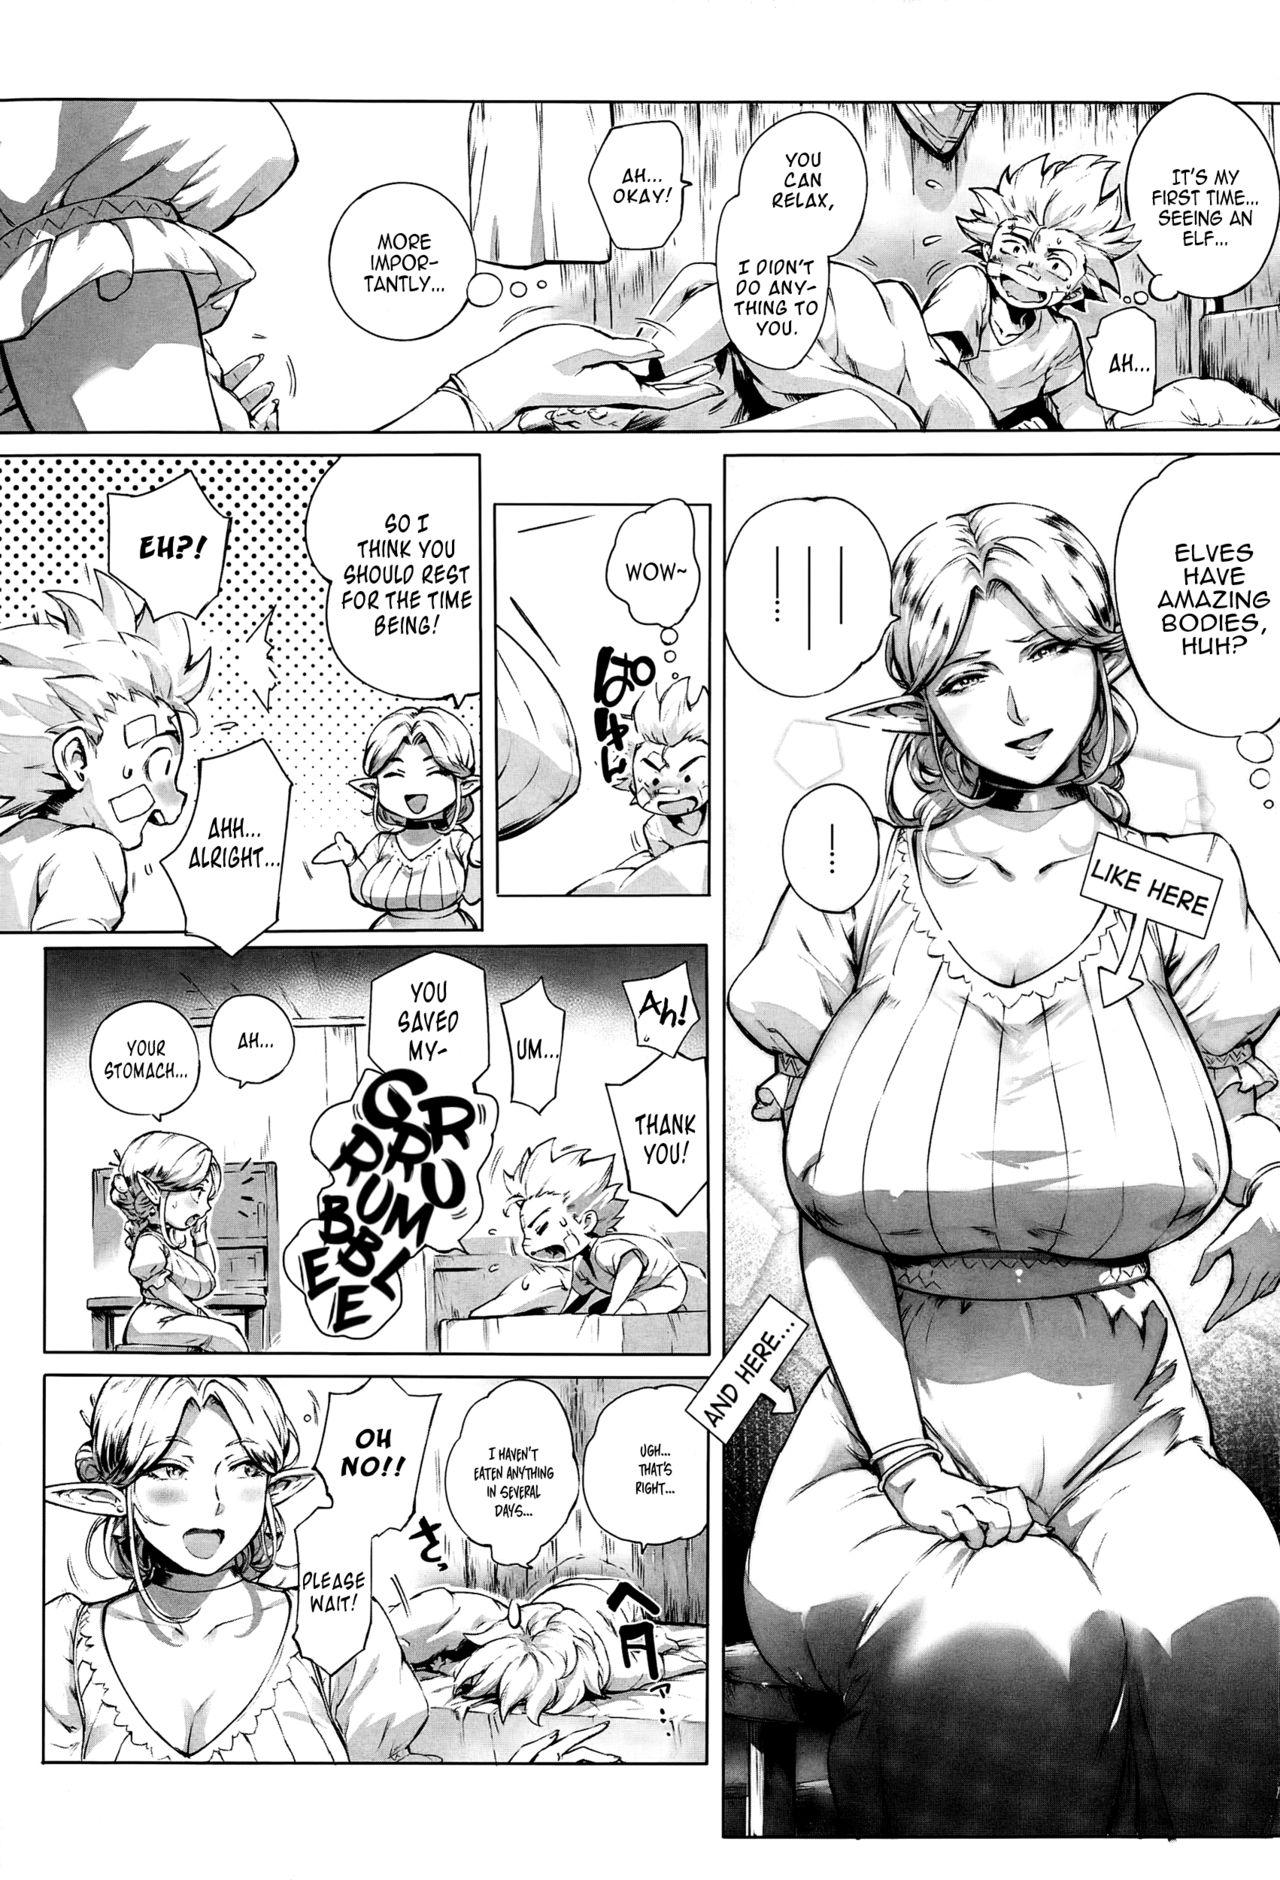 Puta Koko ga Tanetsuke Frontier | This Is The Mating Frontier! Ch. 1-2 Heels - Page 3